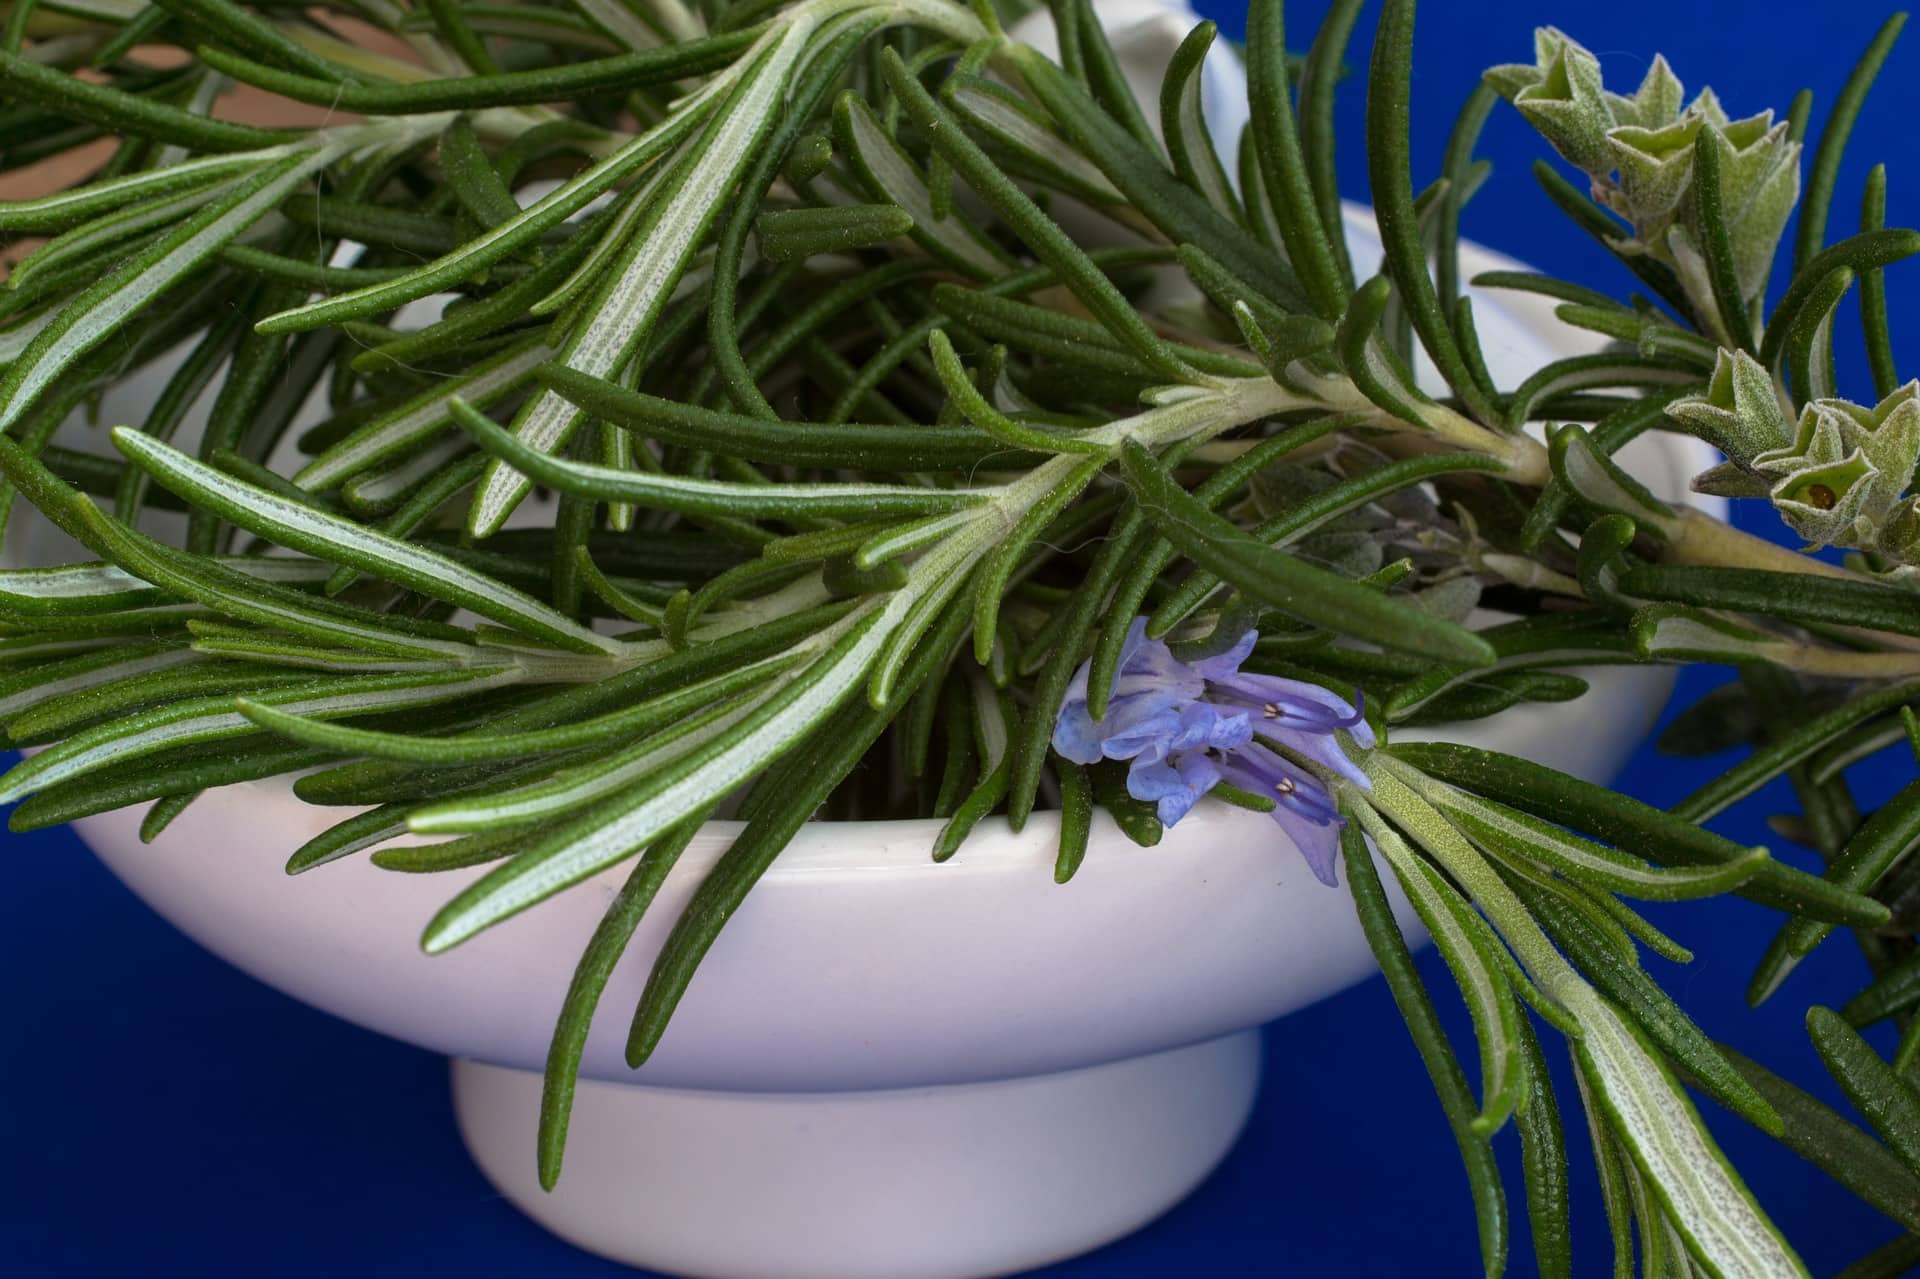 The Symbolic Meaning of Rosemary